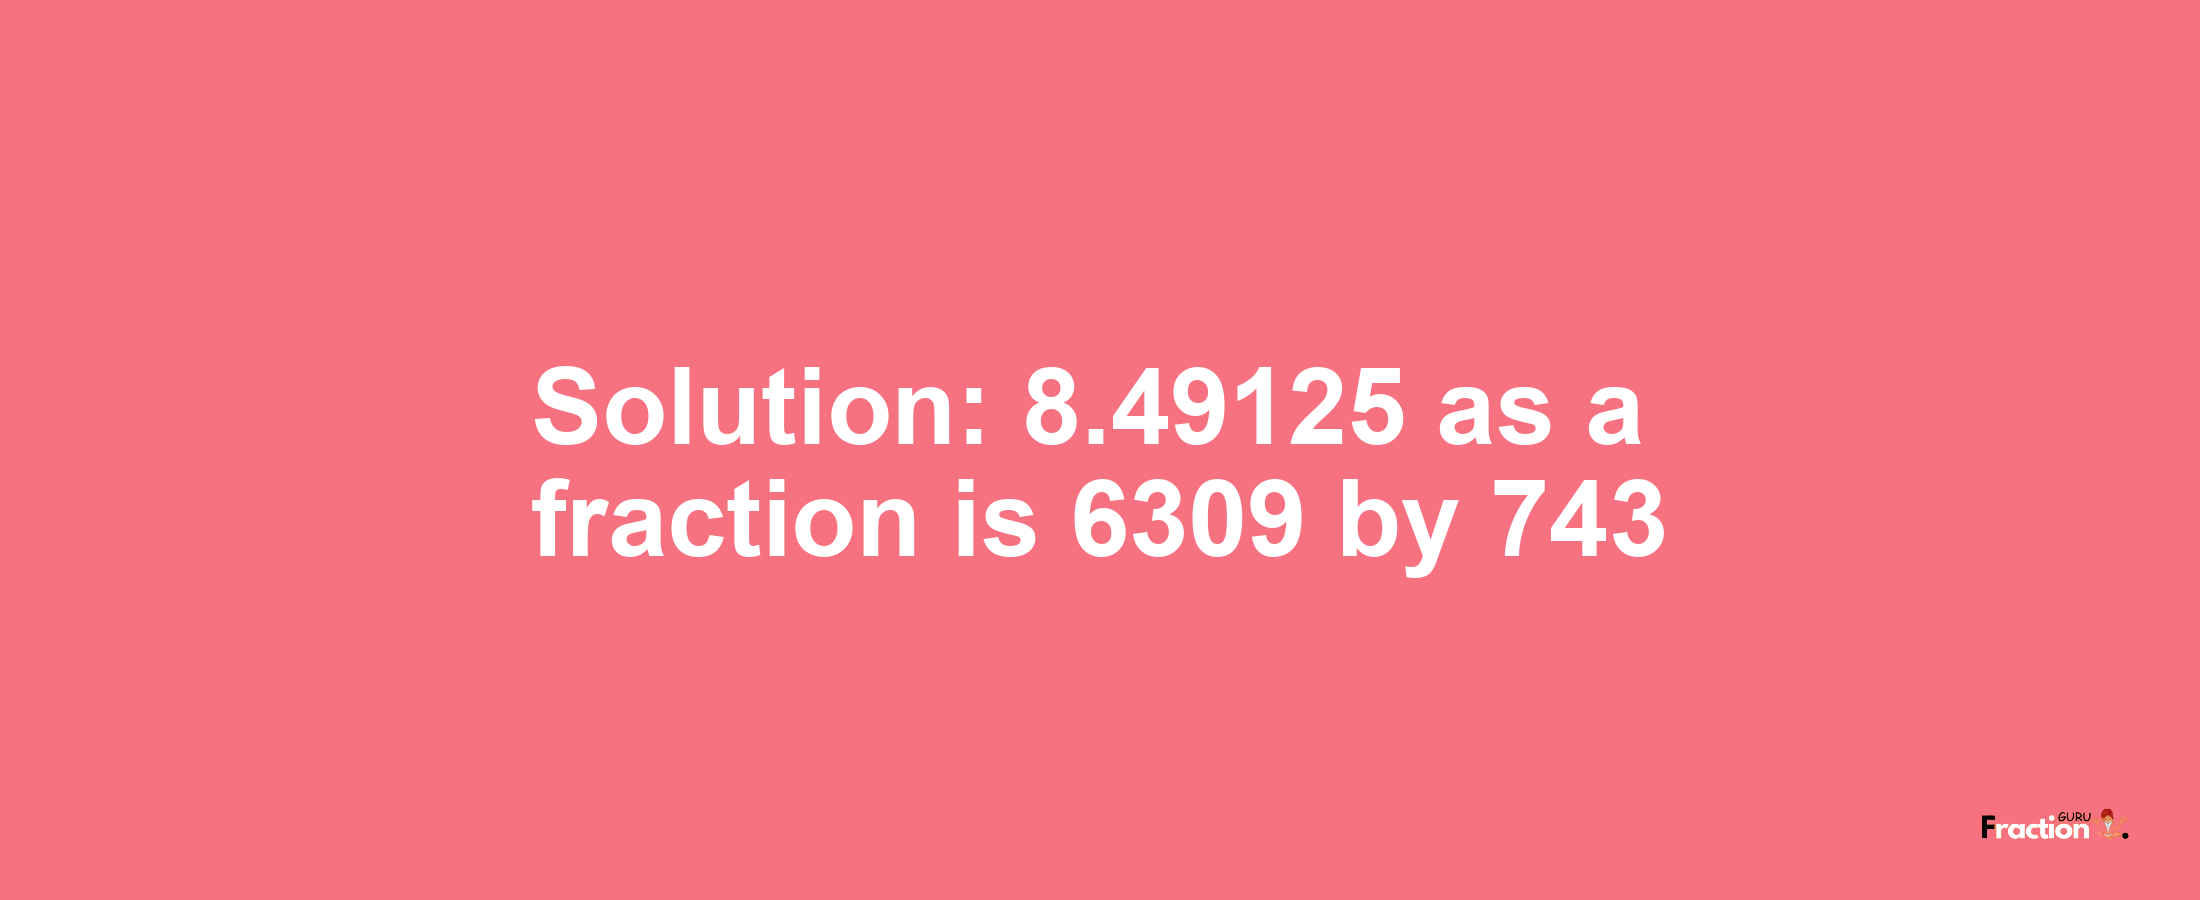 Solution:8.49125 as a fraction is 6309/743